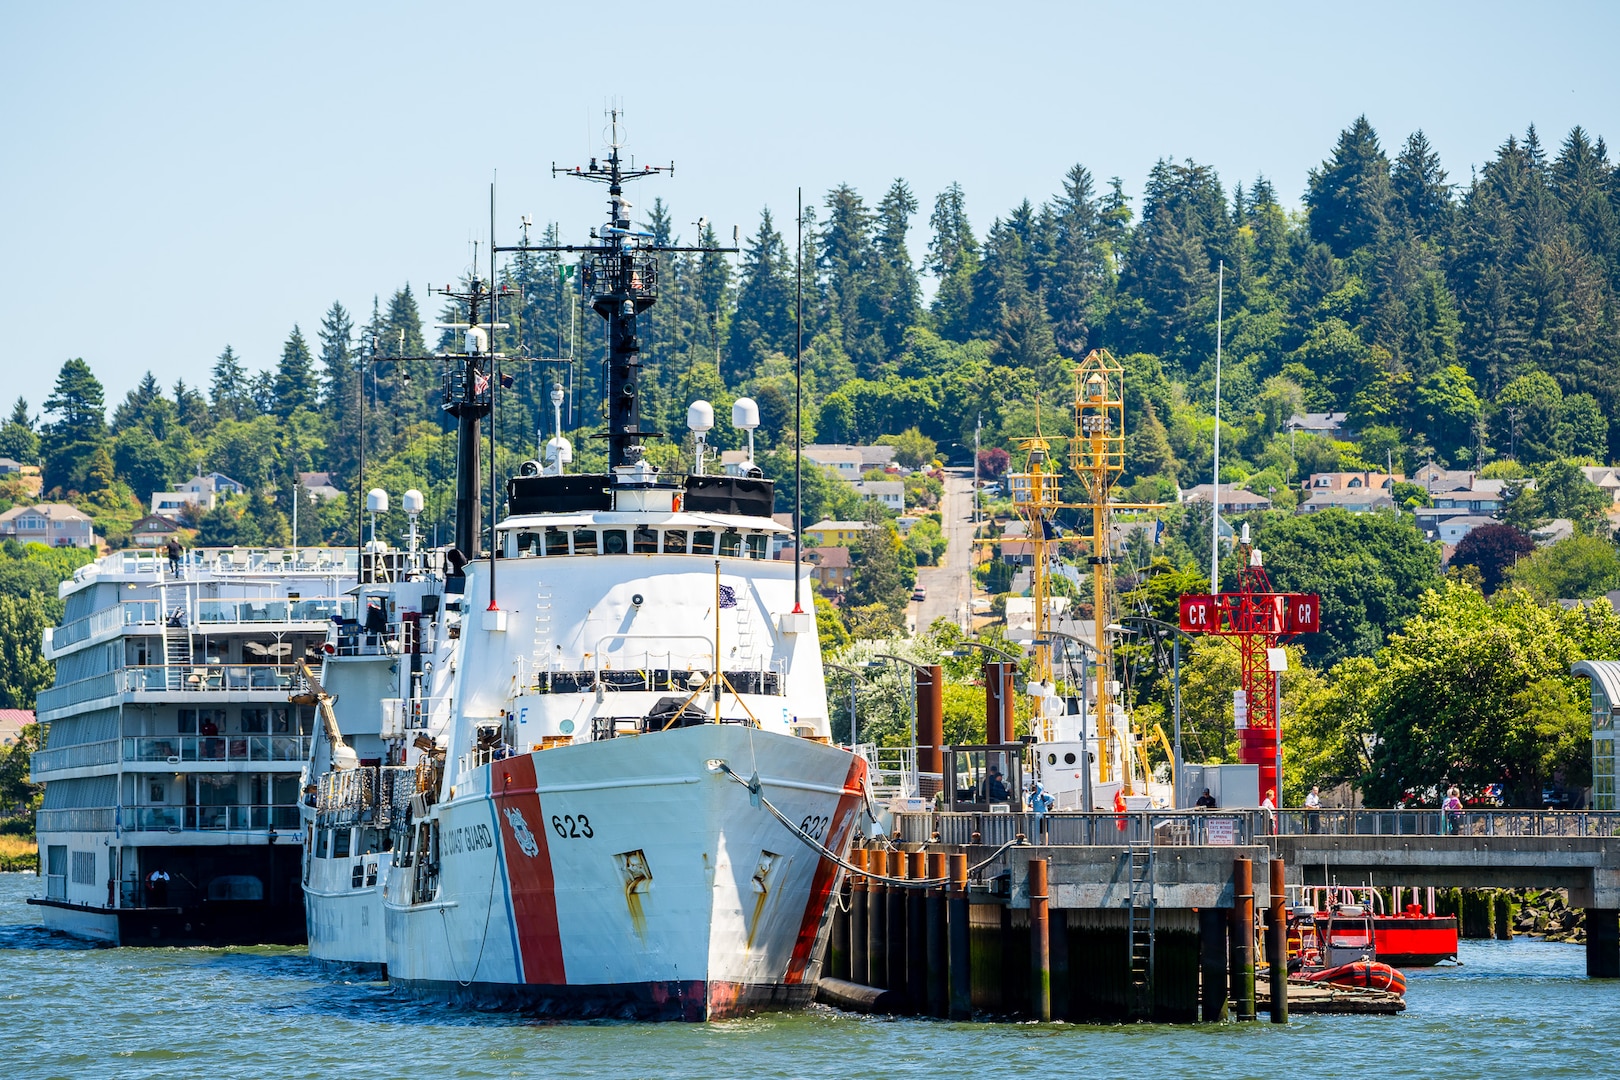 The crew of USCGC Steadfast return to the cutter’s homeport in Astoria, Oregon, following a patrol July 21, 2023. Steadfast is a 210-foot reliance class cutter. (U.S. Coast Guard photo by Petty Officer 1st Class Travis Magee)